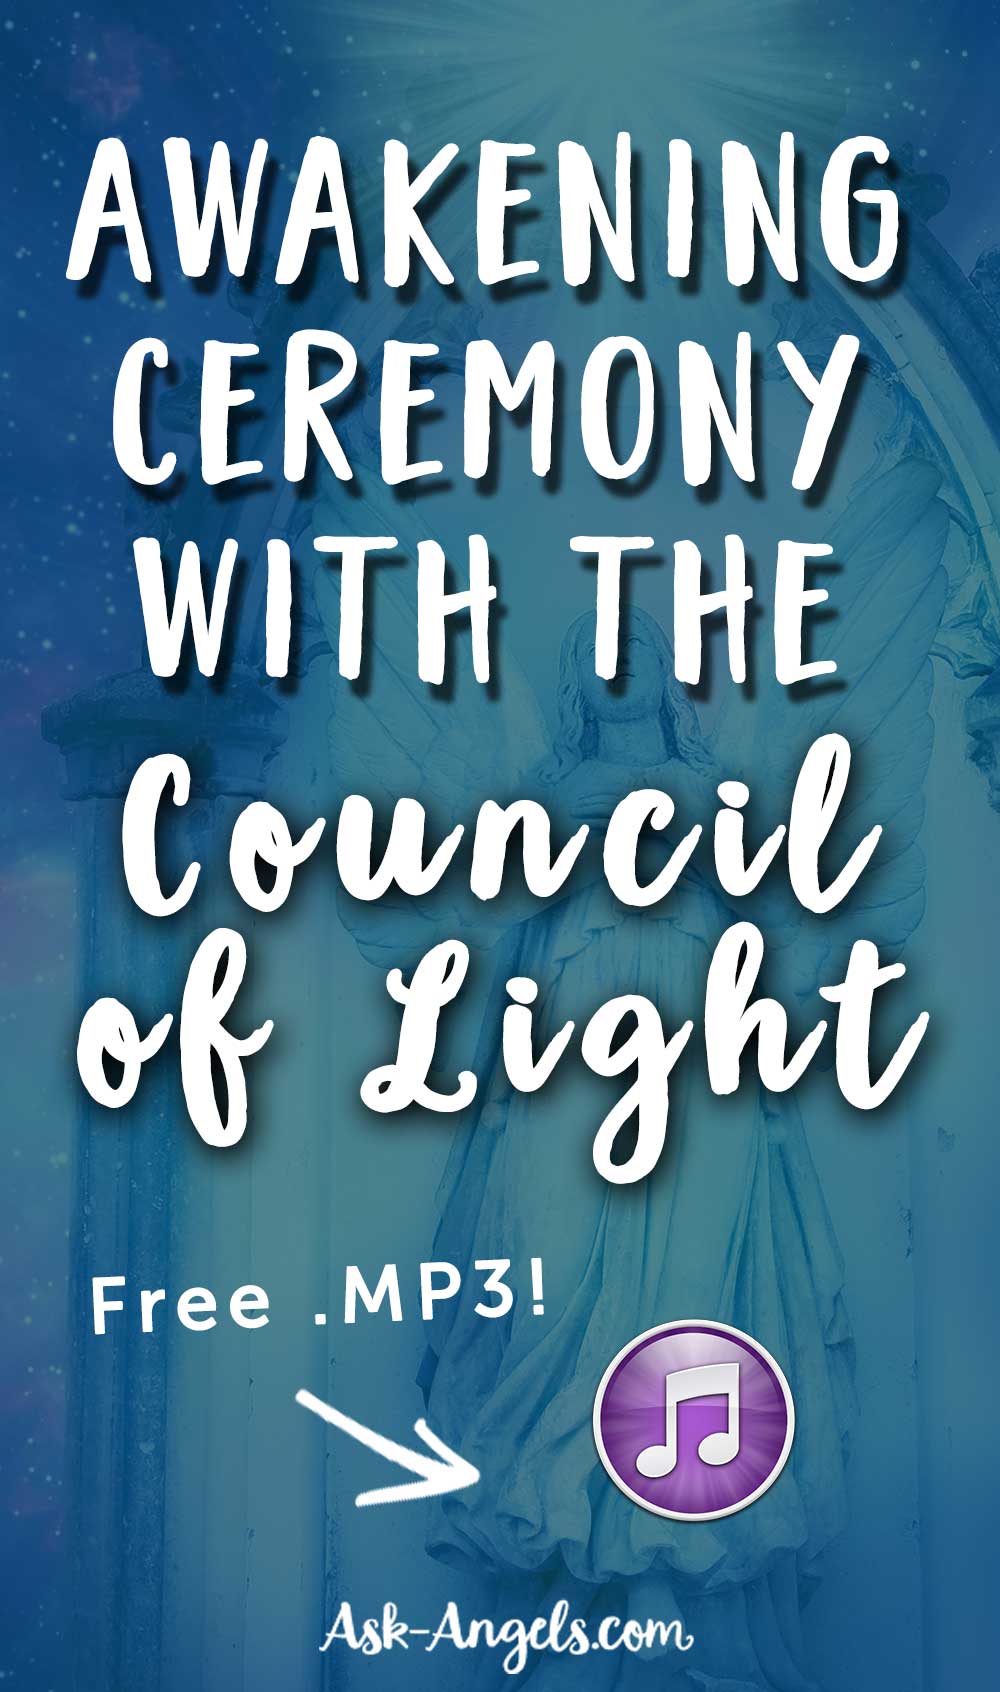 Awakening Ceremony with the Council of Light